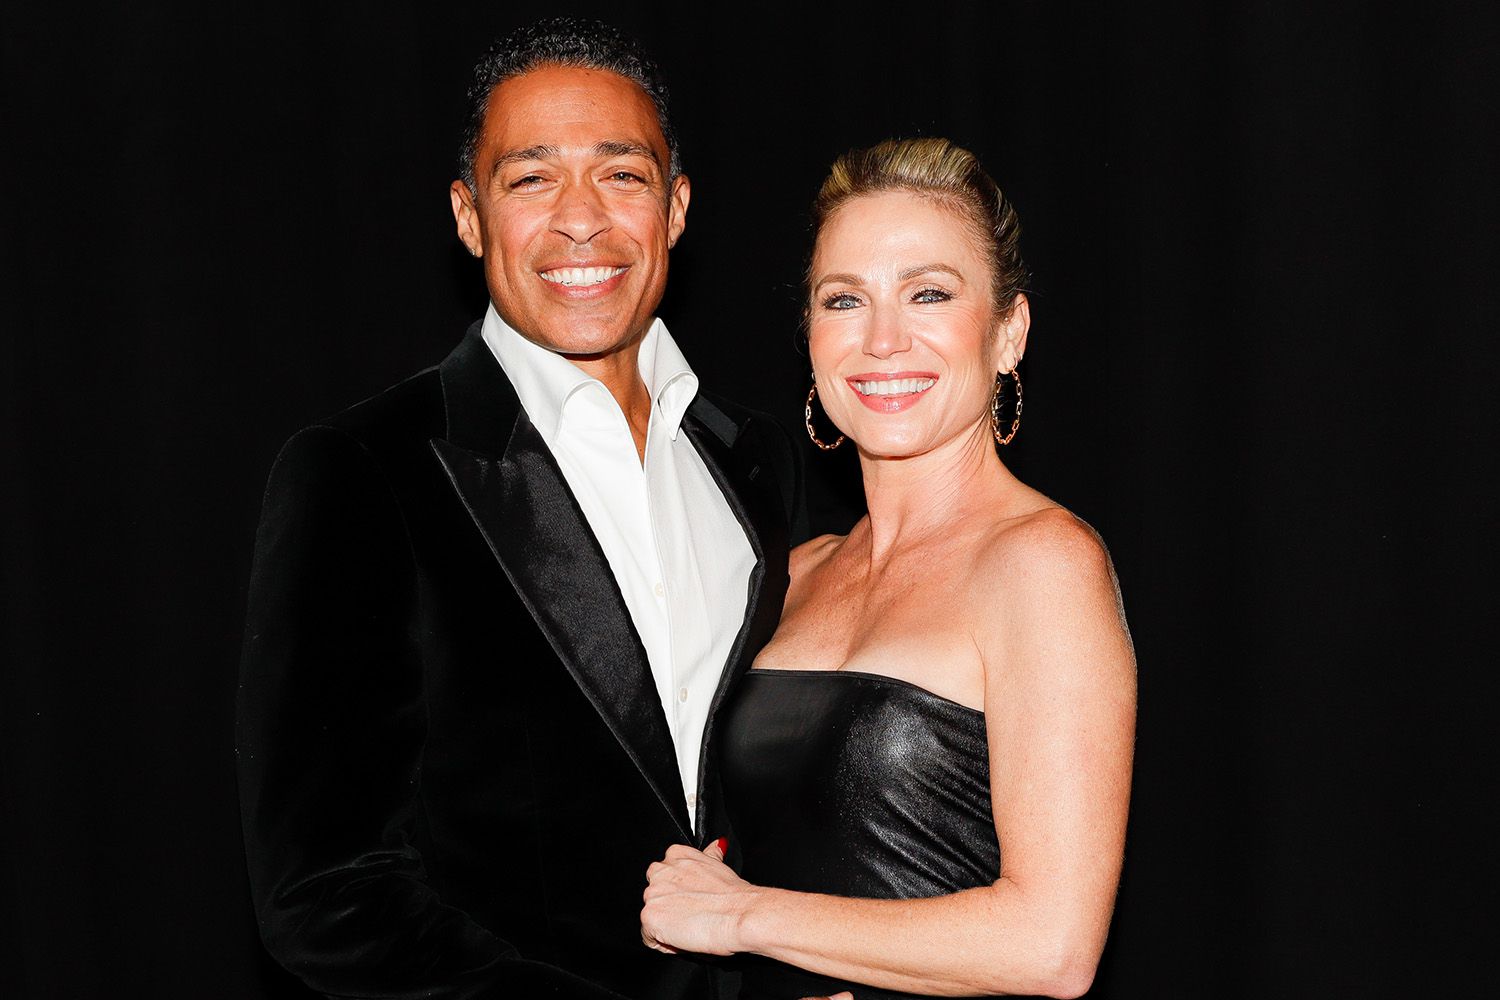 Amy Robach And T.J. Holmes: A New Chapter Begins With A Seaside Stroll And PDA